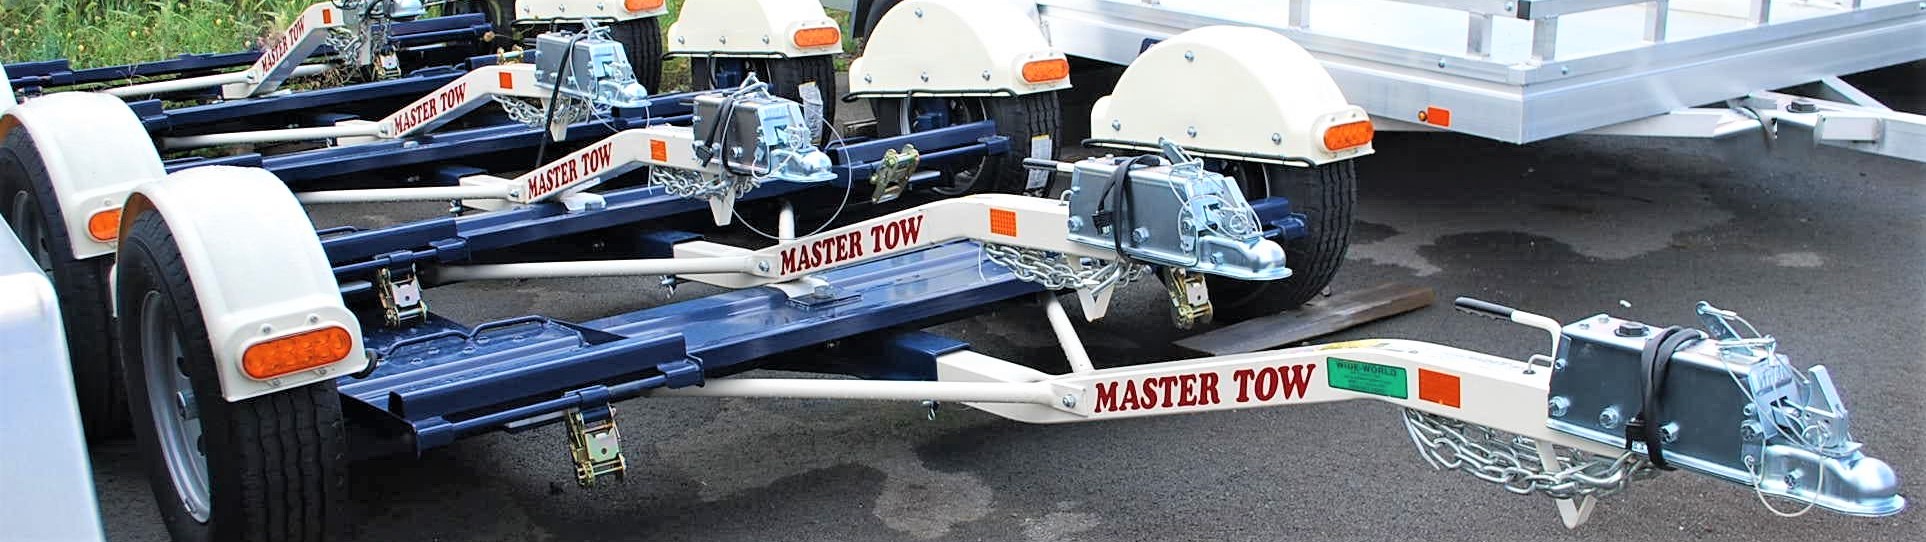 THE BEST CAR TOW DOLLY DEAL IN THE MARKET HOW TO USE. 